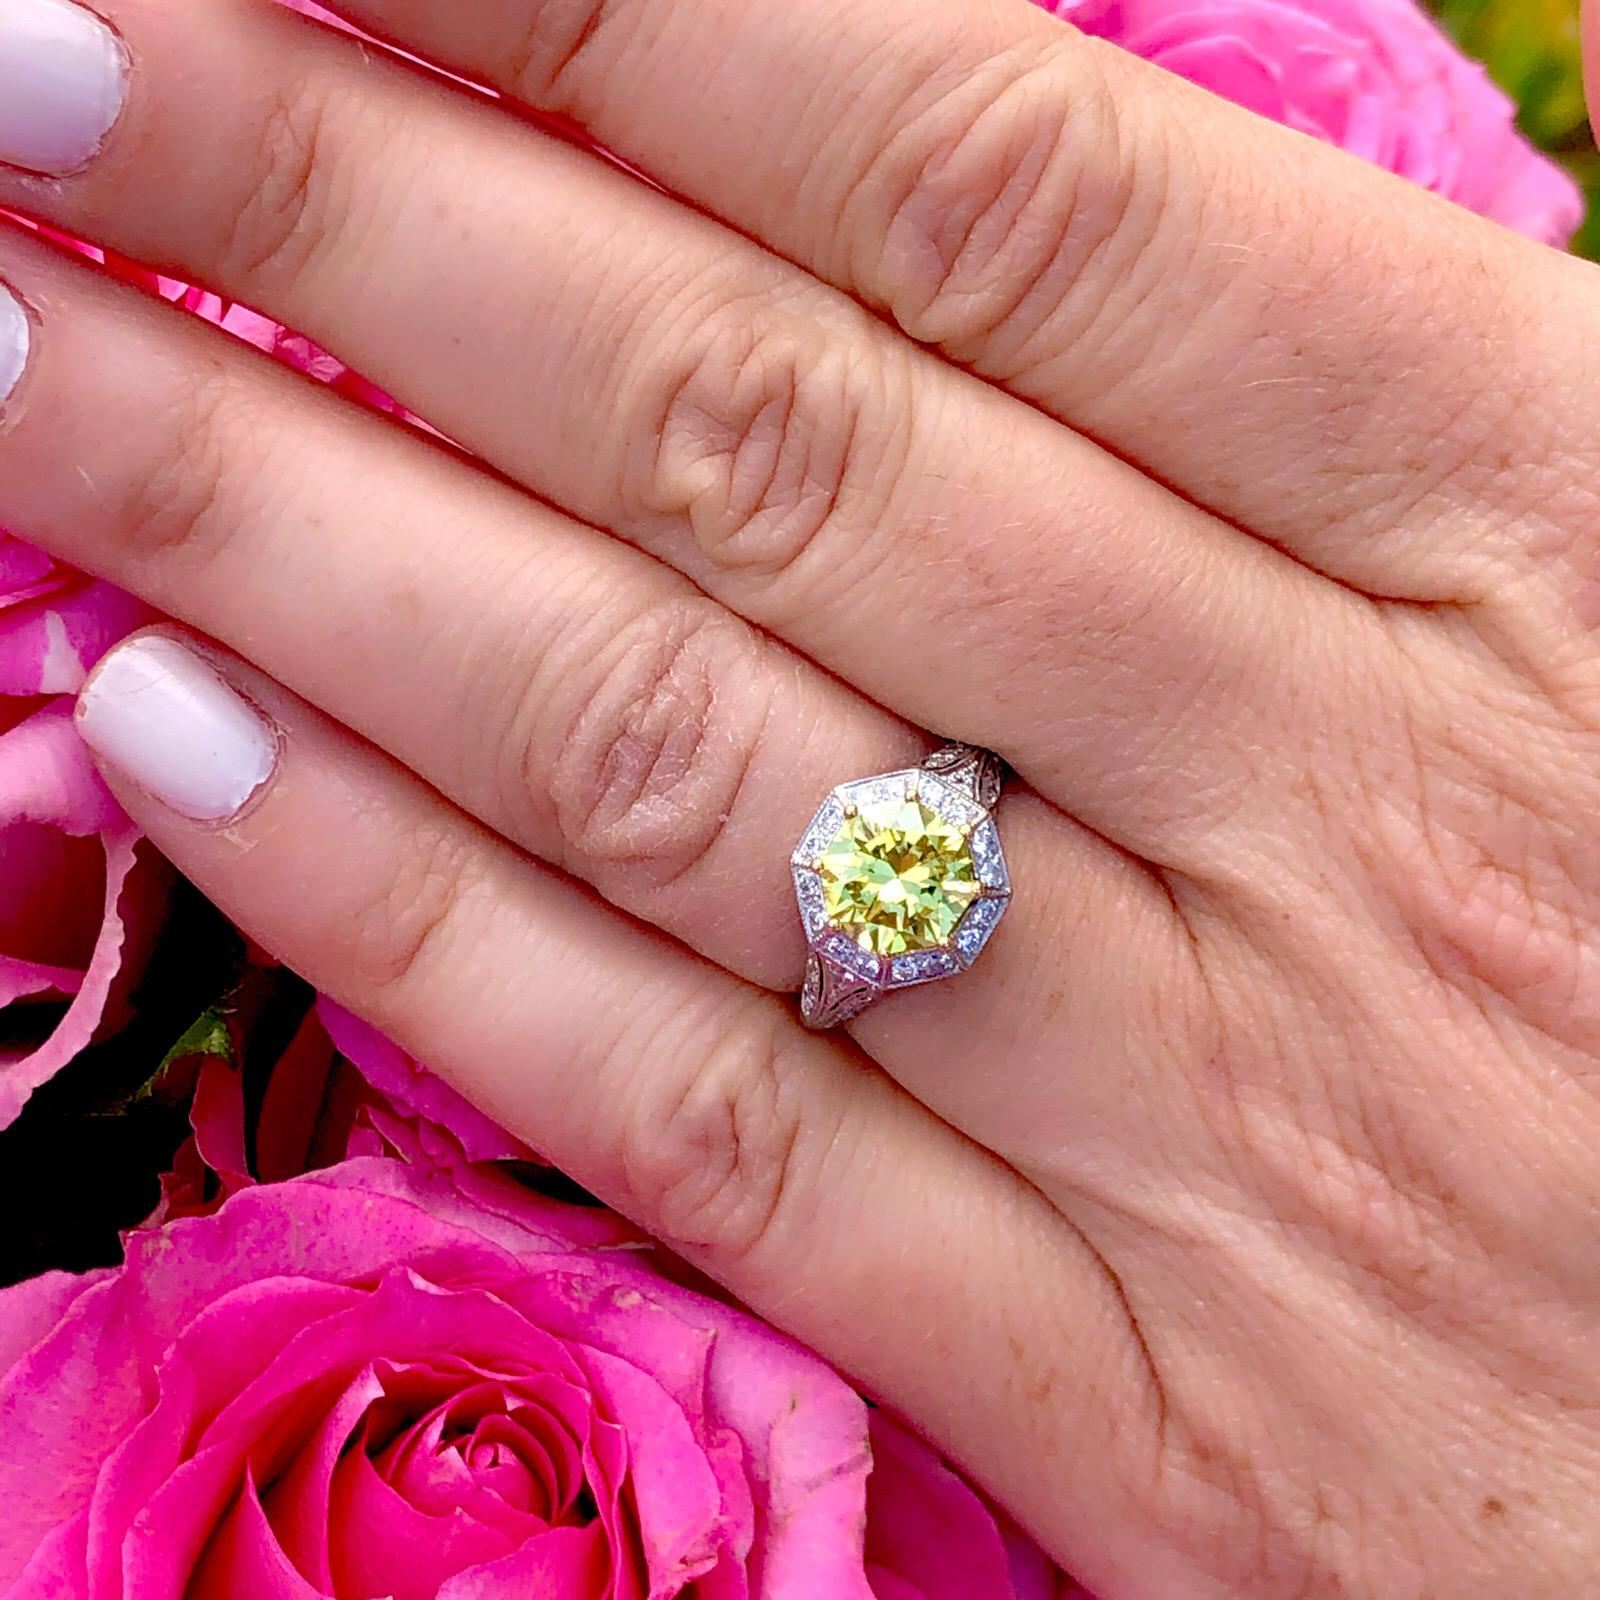 An extraordinary diamond set in an extraordinary custom French ring! This incredible piece showcases an impressive 1.88 carat GIA Fancy Intense Yellow Octagonal Cut Modified Brilliant Diamond set in a vintage inspired platinum mounting by French